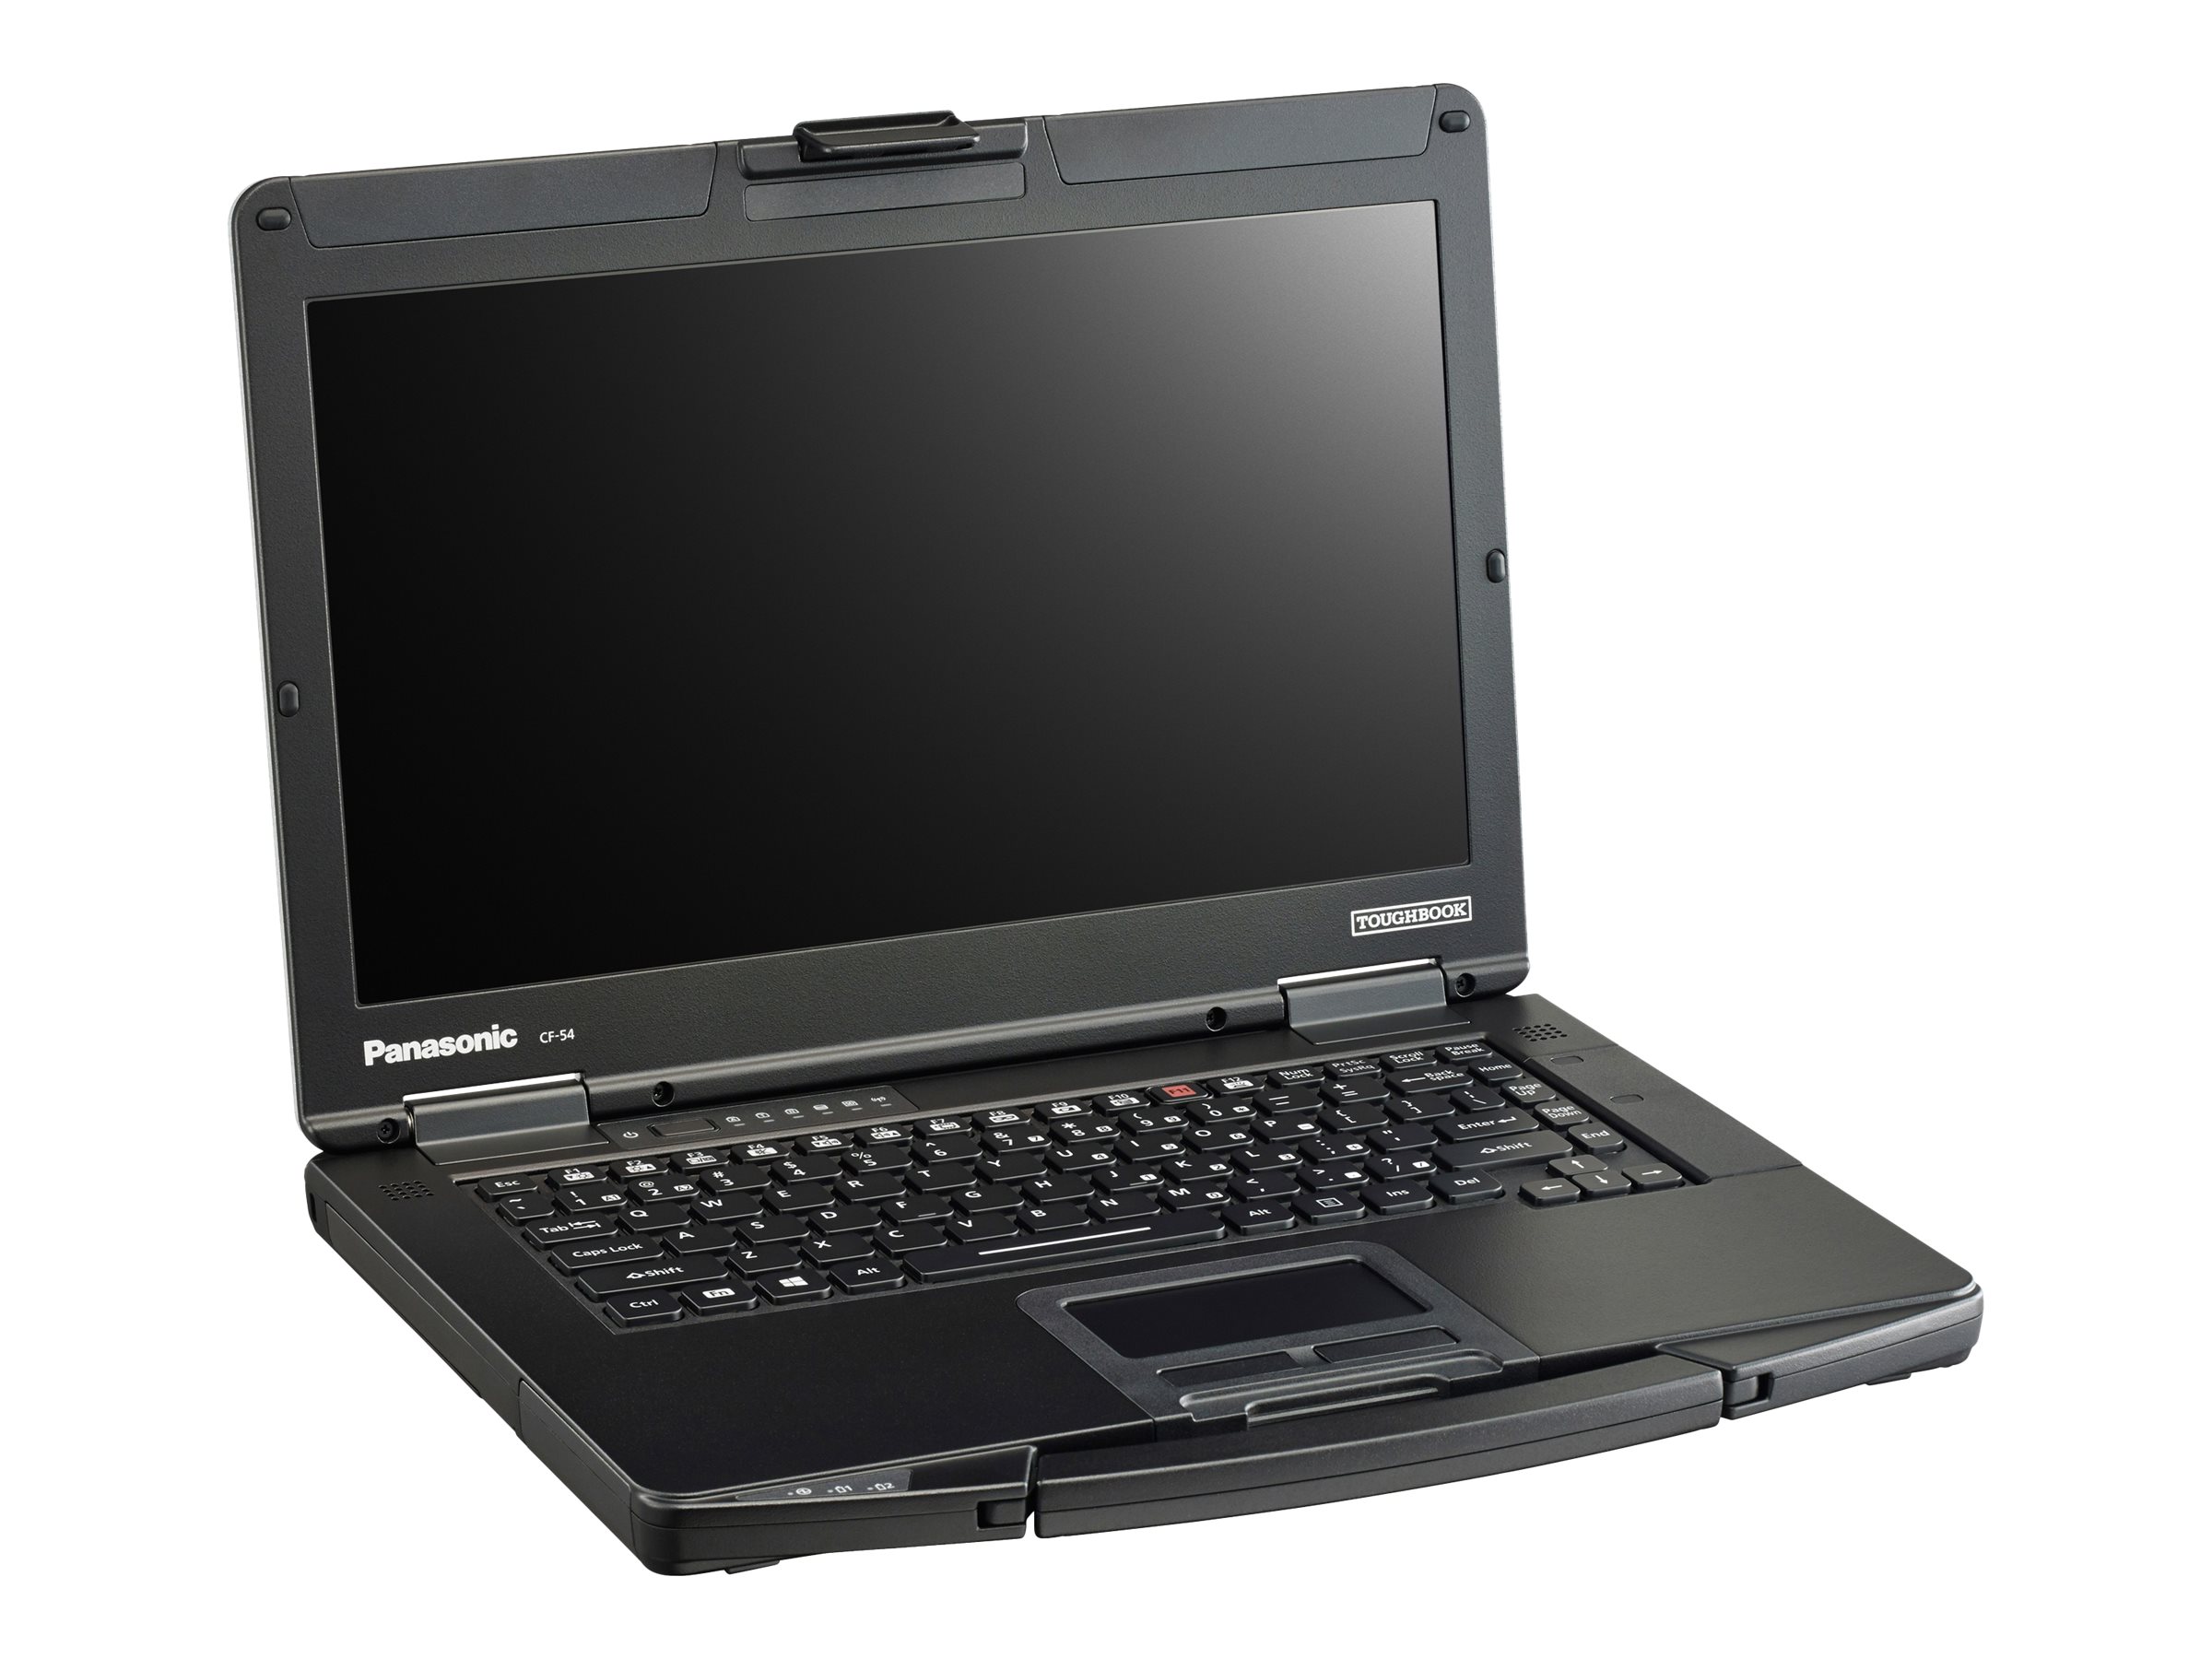 Panasonic Toughbook 54 Prime - Intel Core i7 - 7600U / up to 3.9 GHz - vPro - Win 10 Pro - HD Graphics 620 - 8 GB RAM - 256 GB SSD - 14" 1366 x 768 (HD) - Wi-Fi 5 - with Toughbook Preferred - image 4 of 16